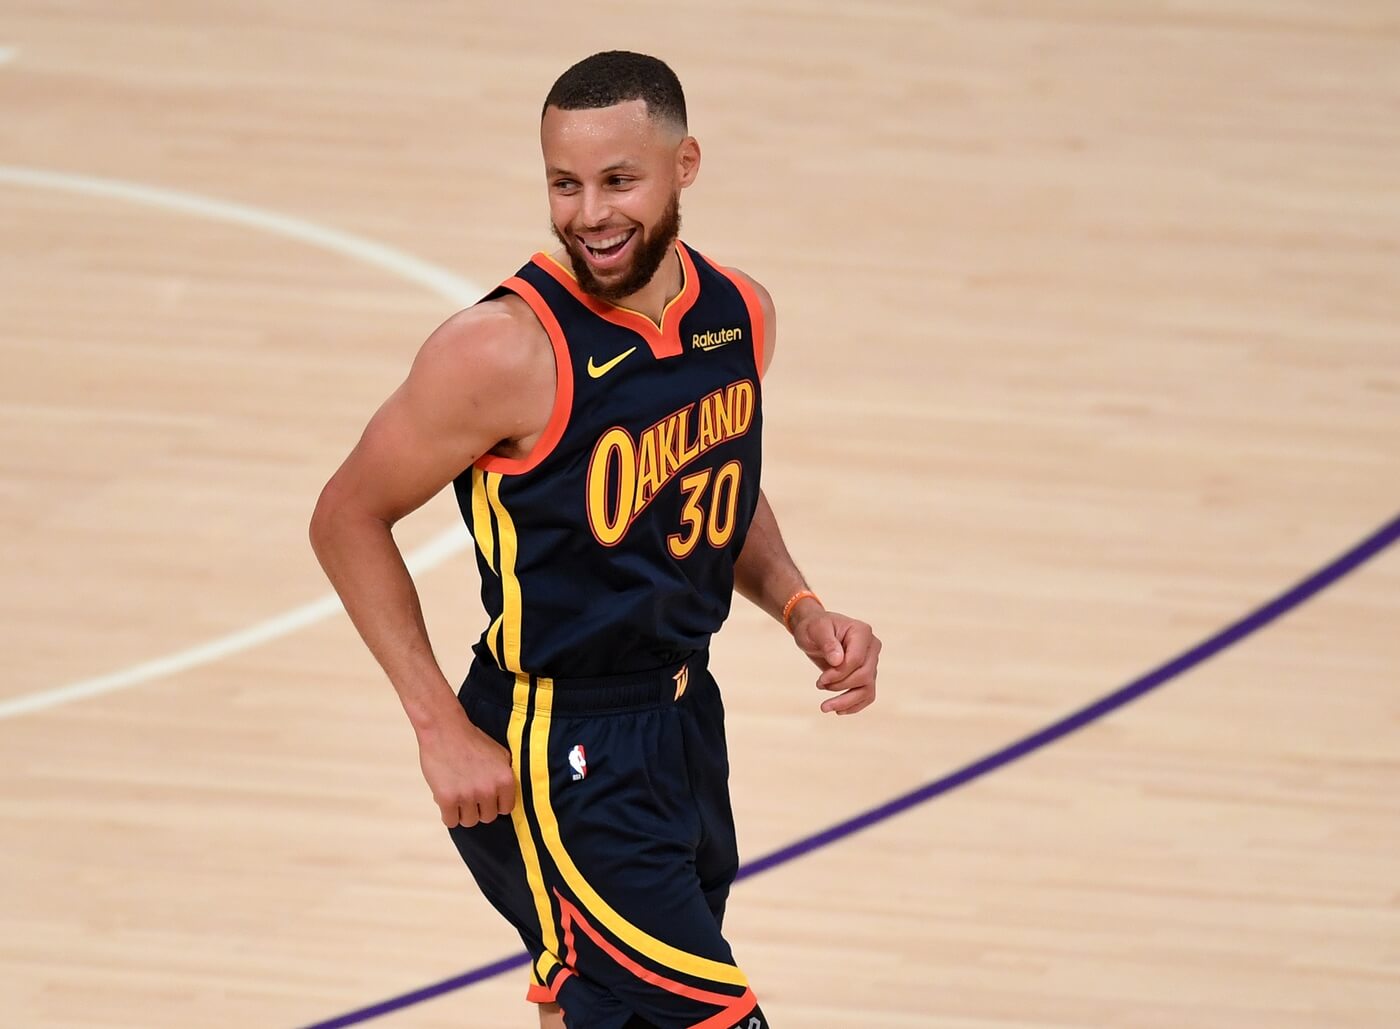 4 early darkhorse contenders for 2022 NBA Championship